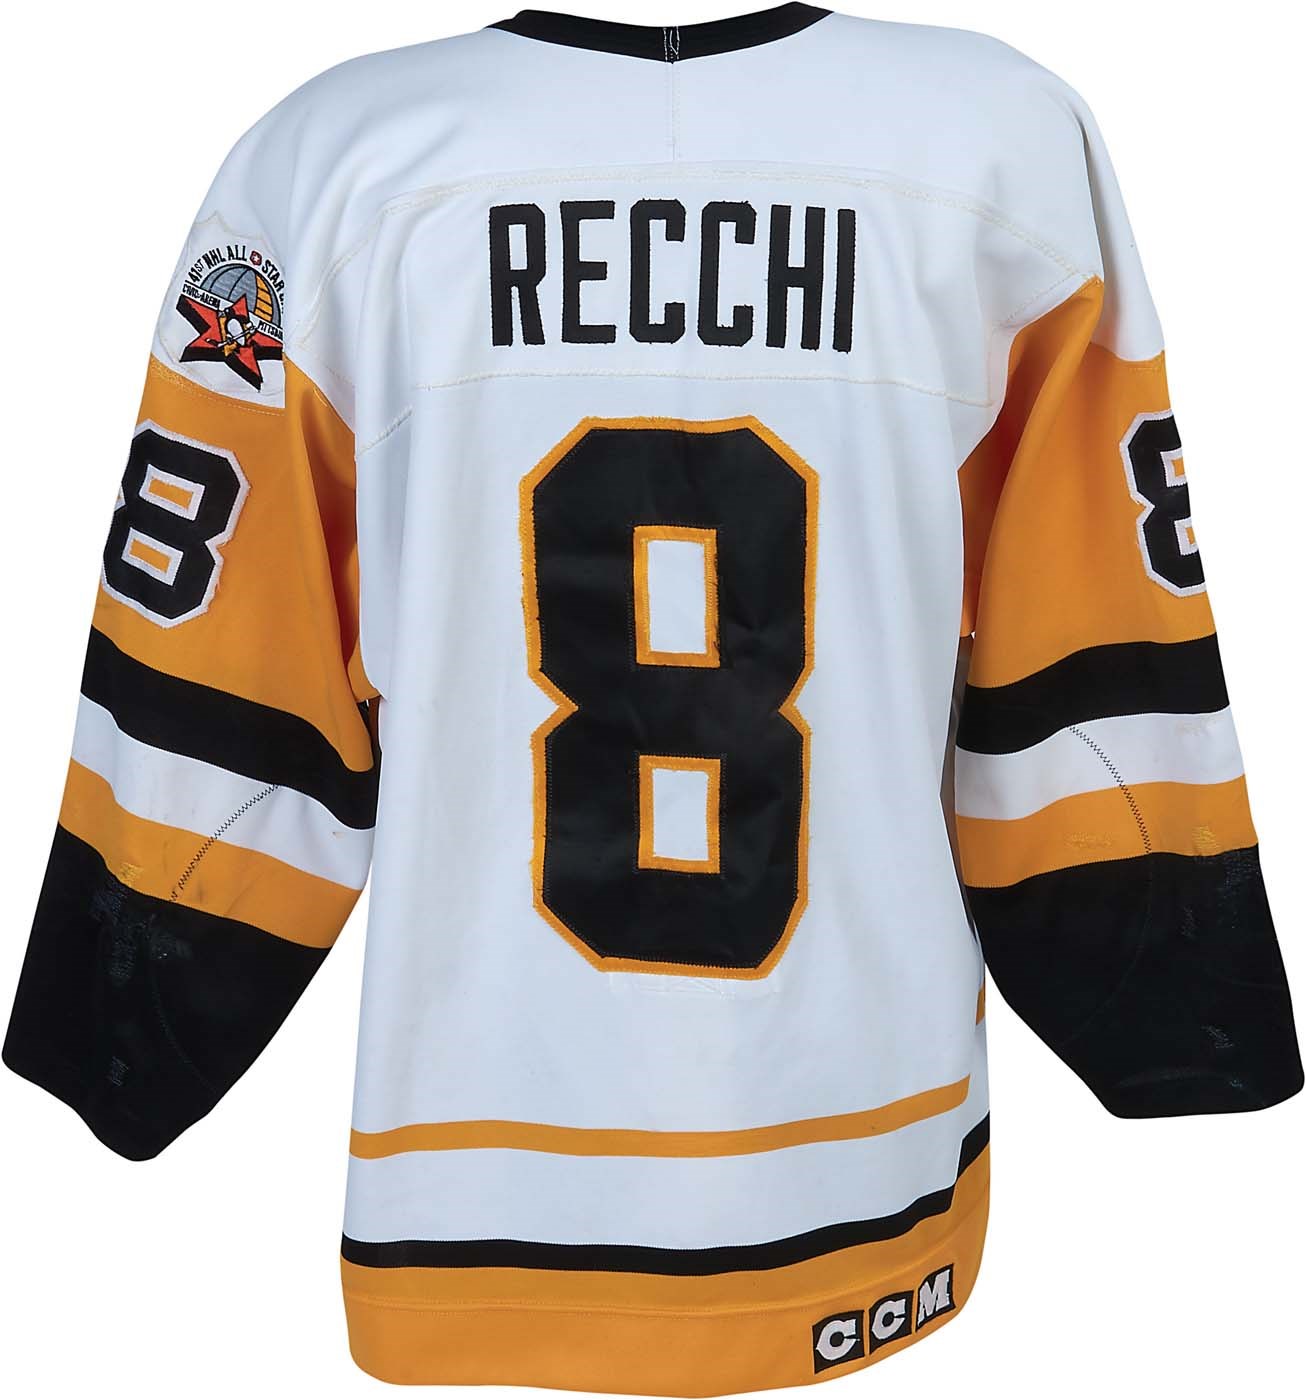 - 1989-90 Mark Recchi Game Worn Pittsburgh Penguins Rookie Jersey w/All-Star Patch & 26 Team Repairs